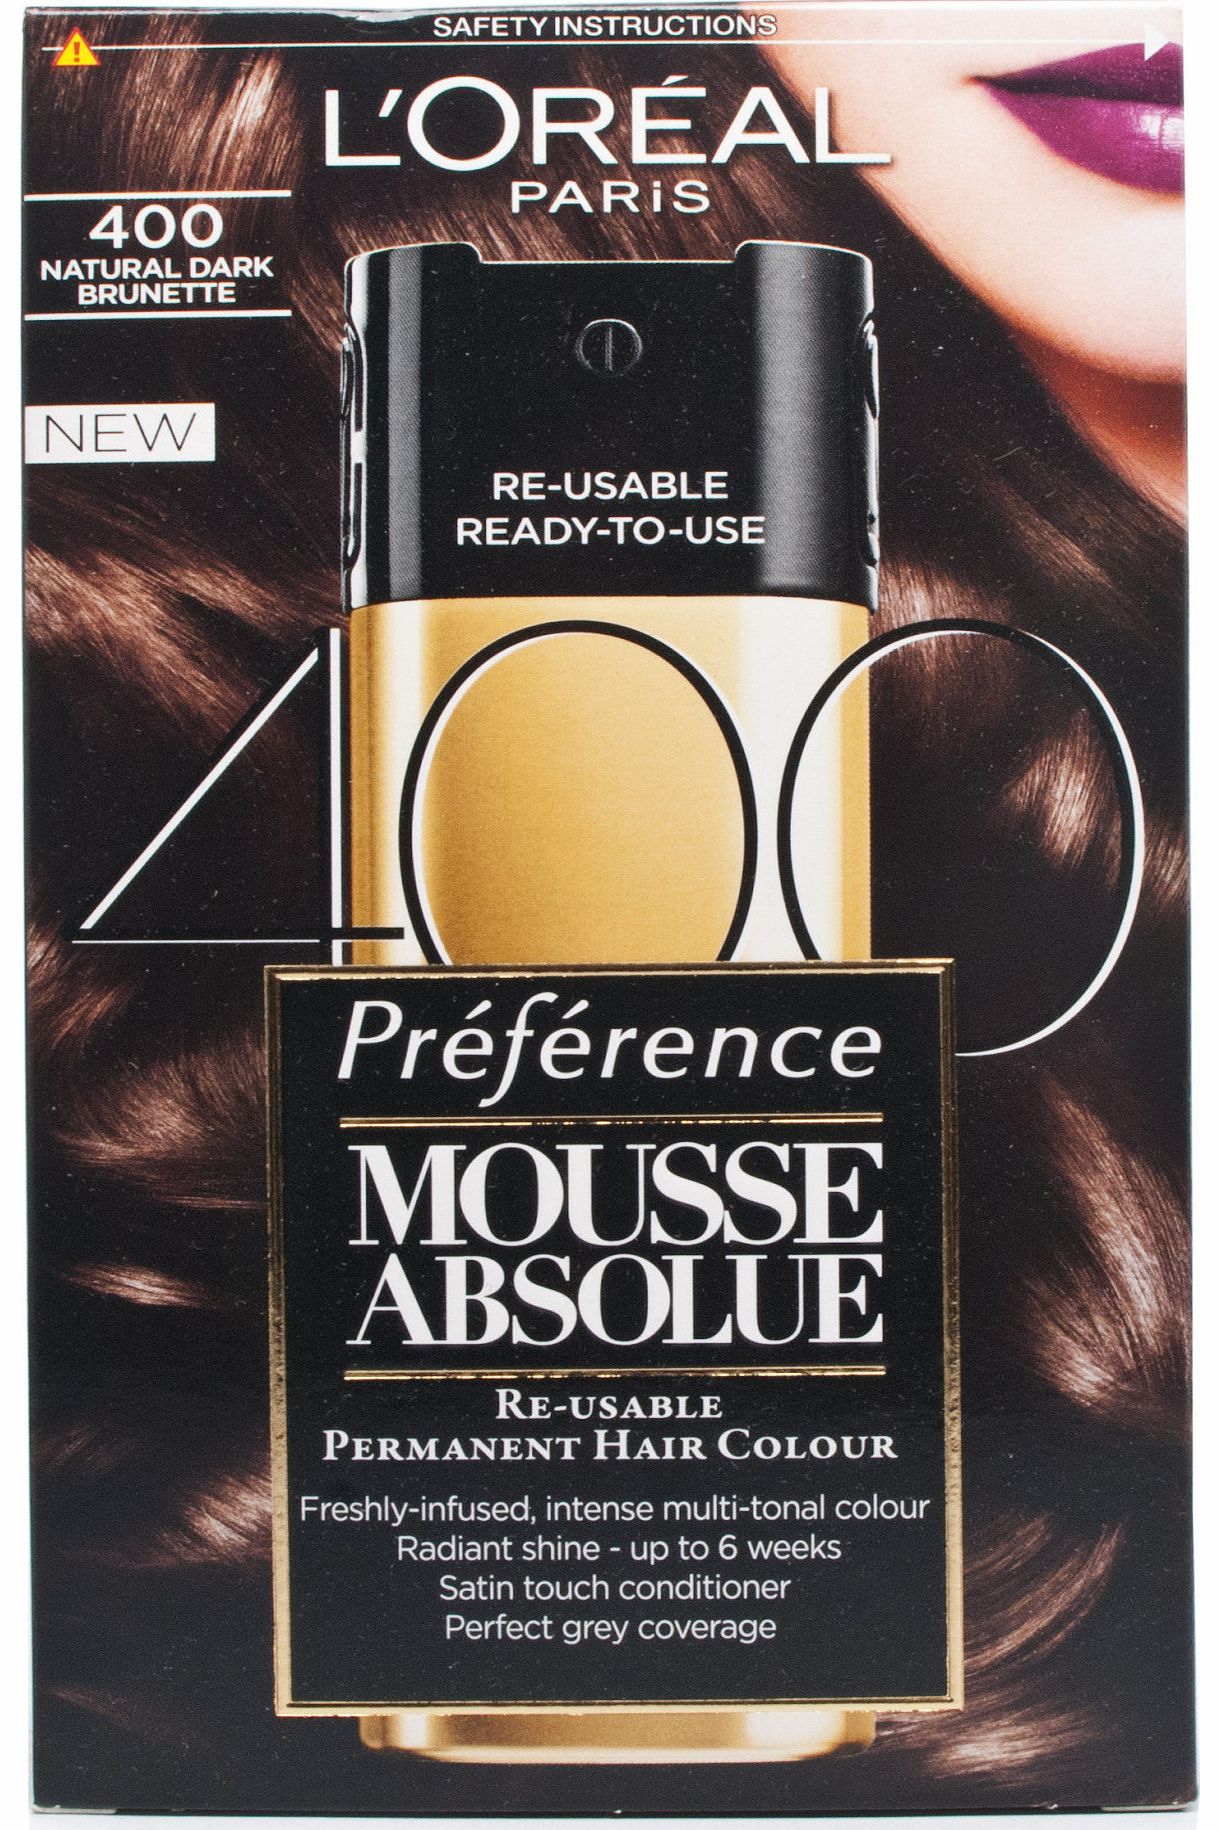 L'Oreal Mousse Absolue Natural Dark